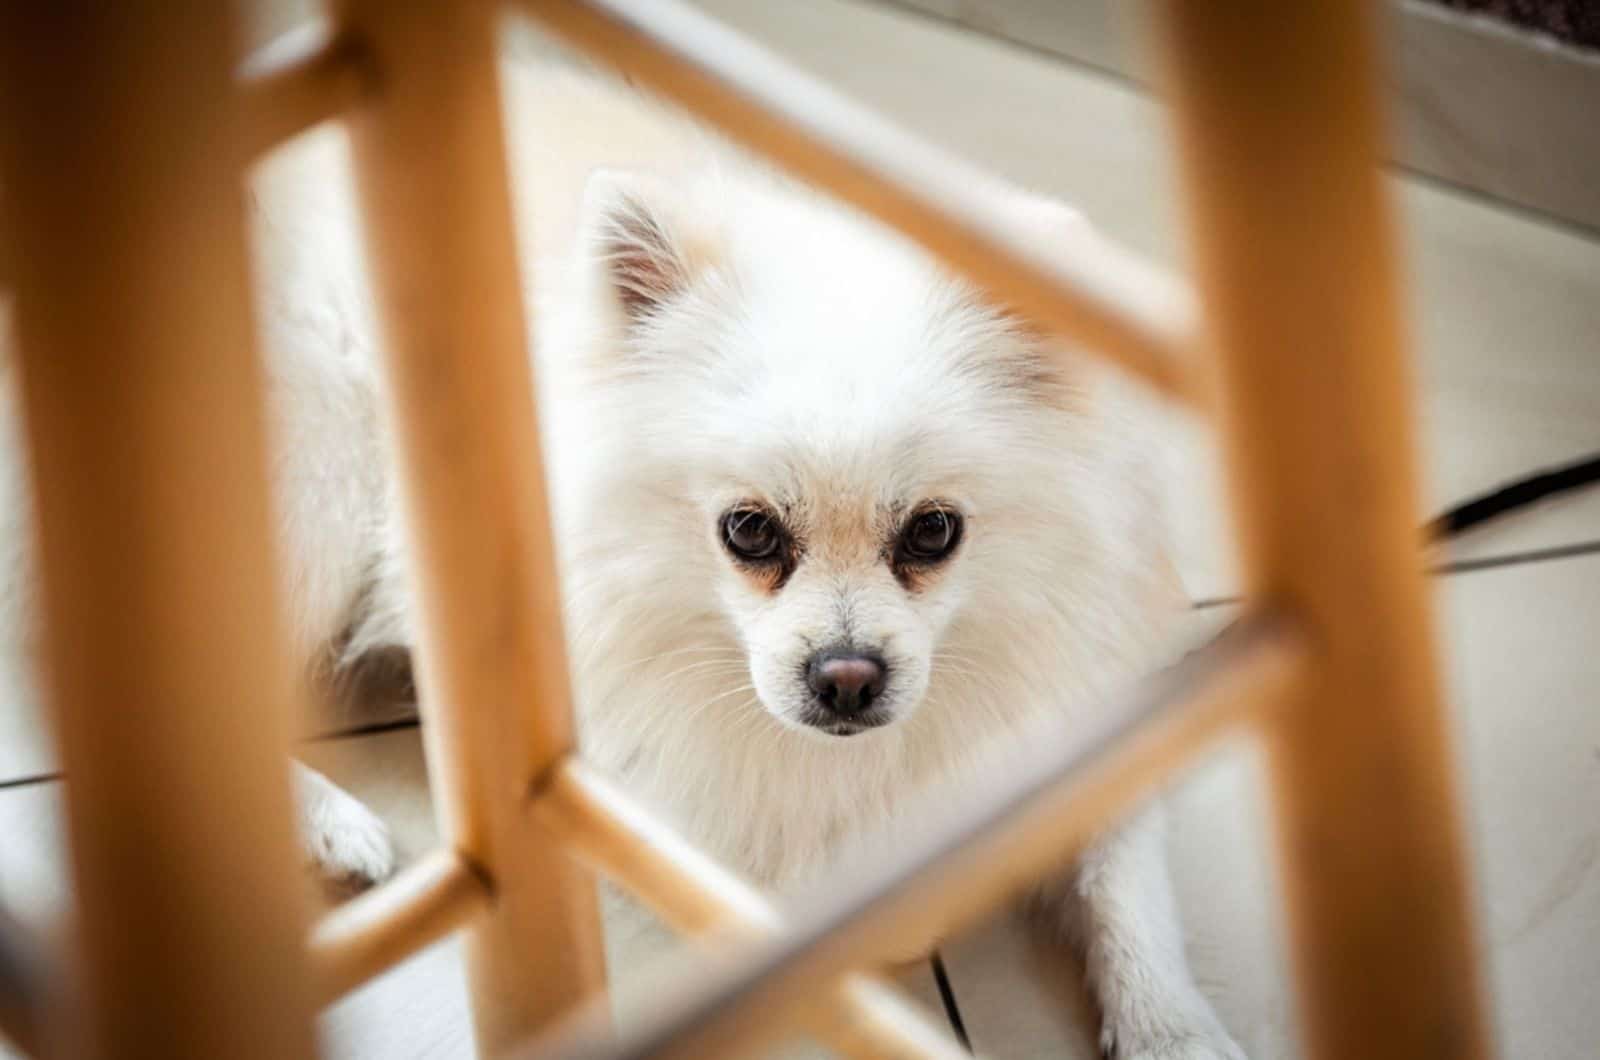 15 Spitz Dog Breeds That Are Really Spitzy